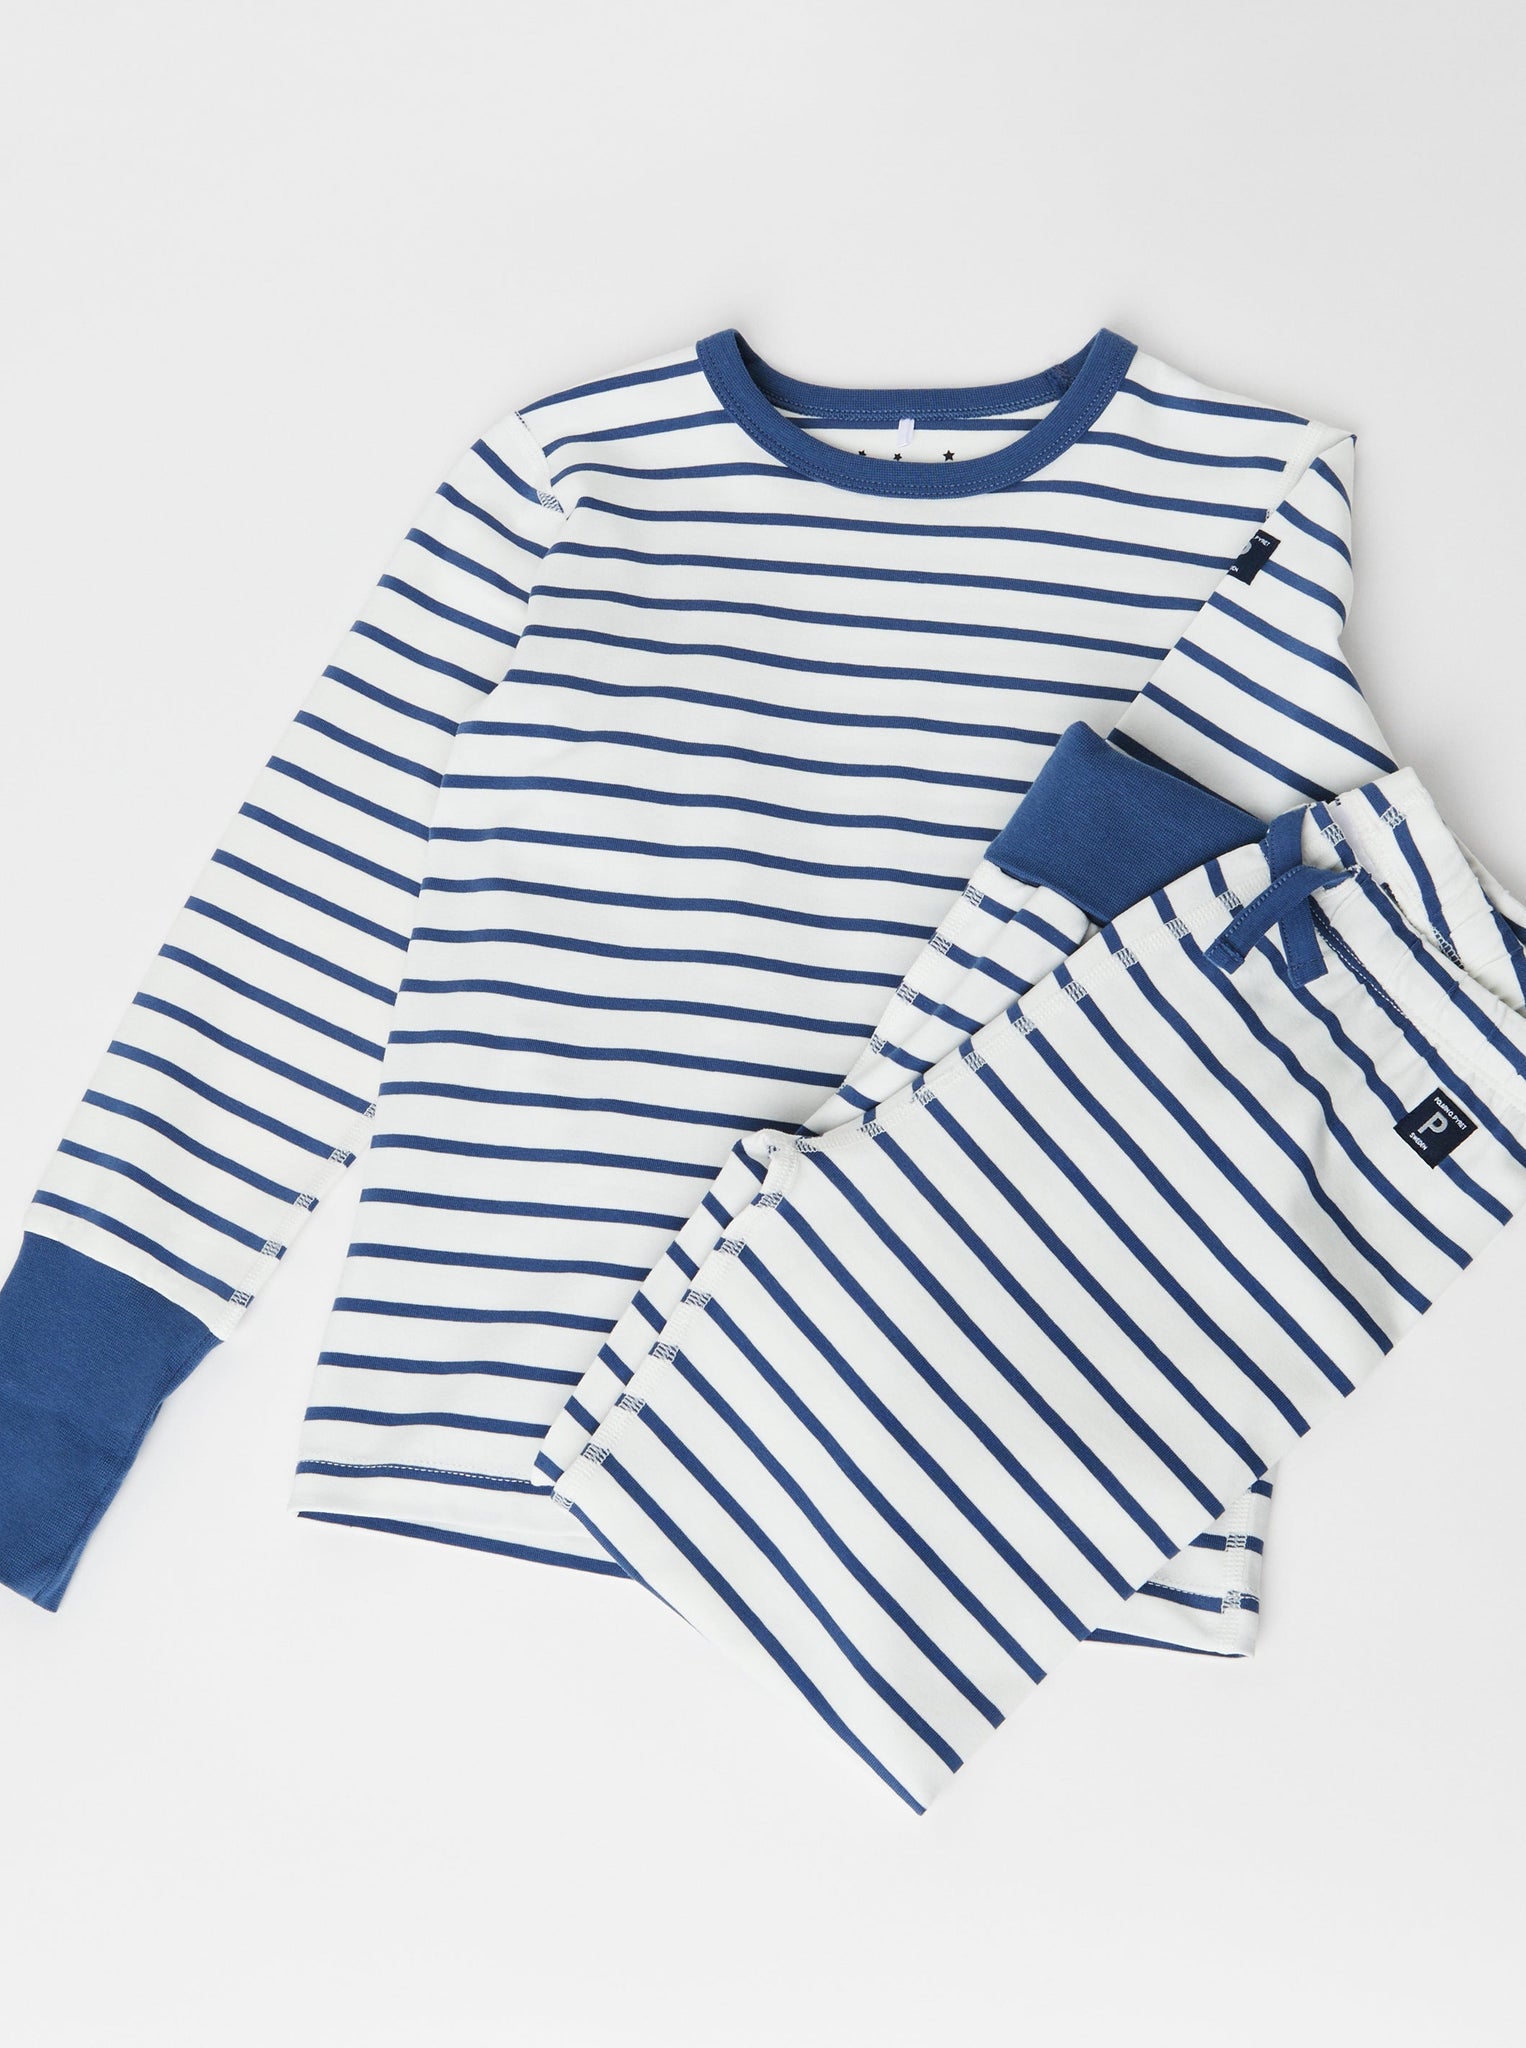 Organic Cotton Striped Kids Pyjamas from the Polarn O. Pyret kidswear collection. Nordic kids clothes made from sustainable sources.